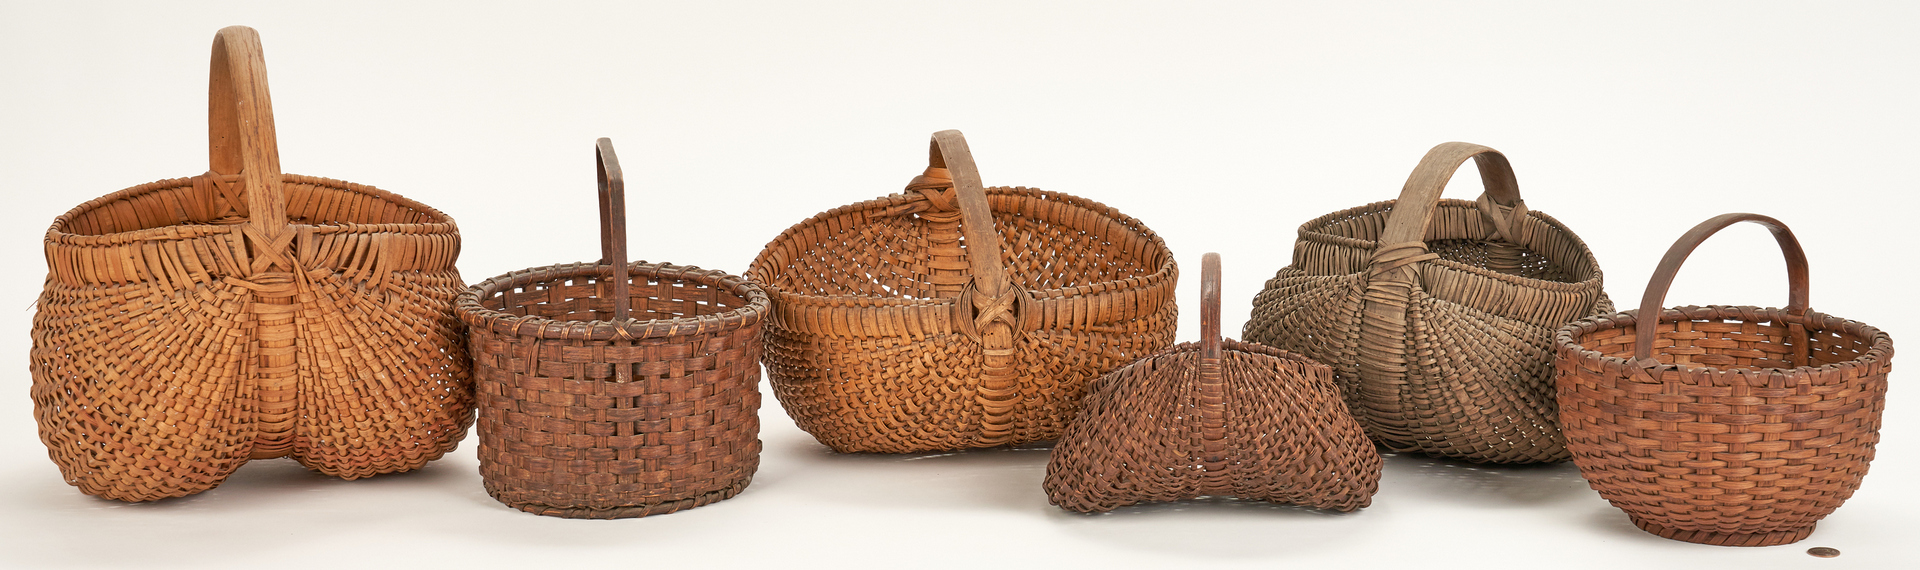 Lot 654: 6 Tennessee & Southern Oak Baskets, Late 19th/Early 20th Century